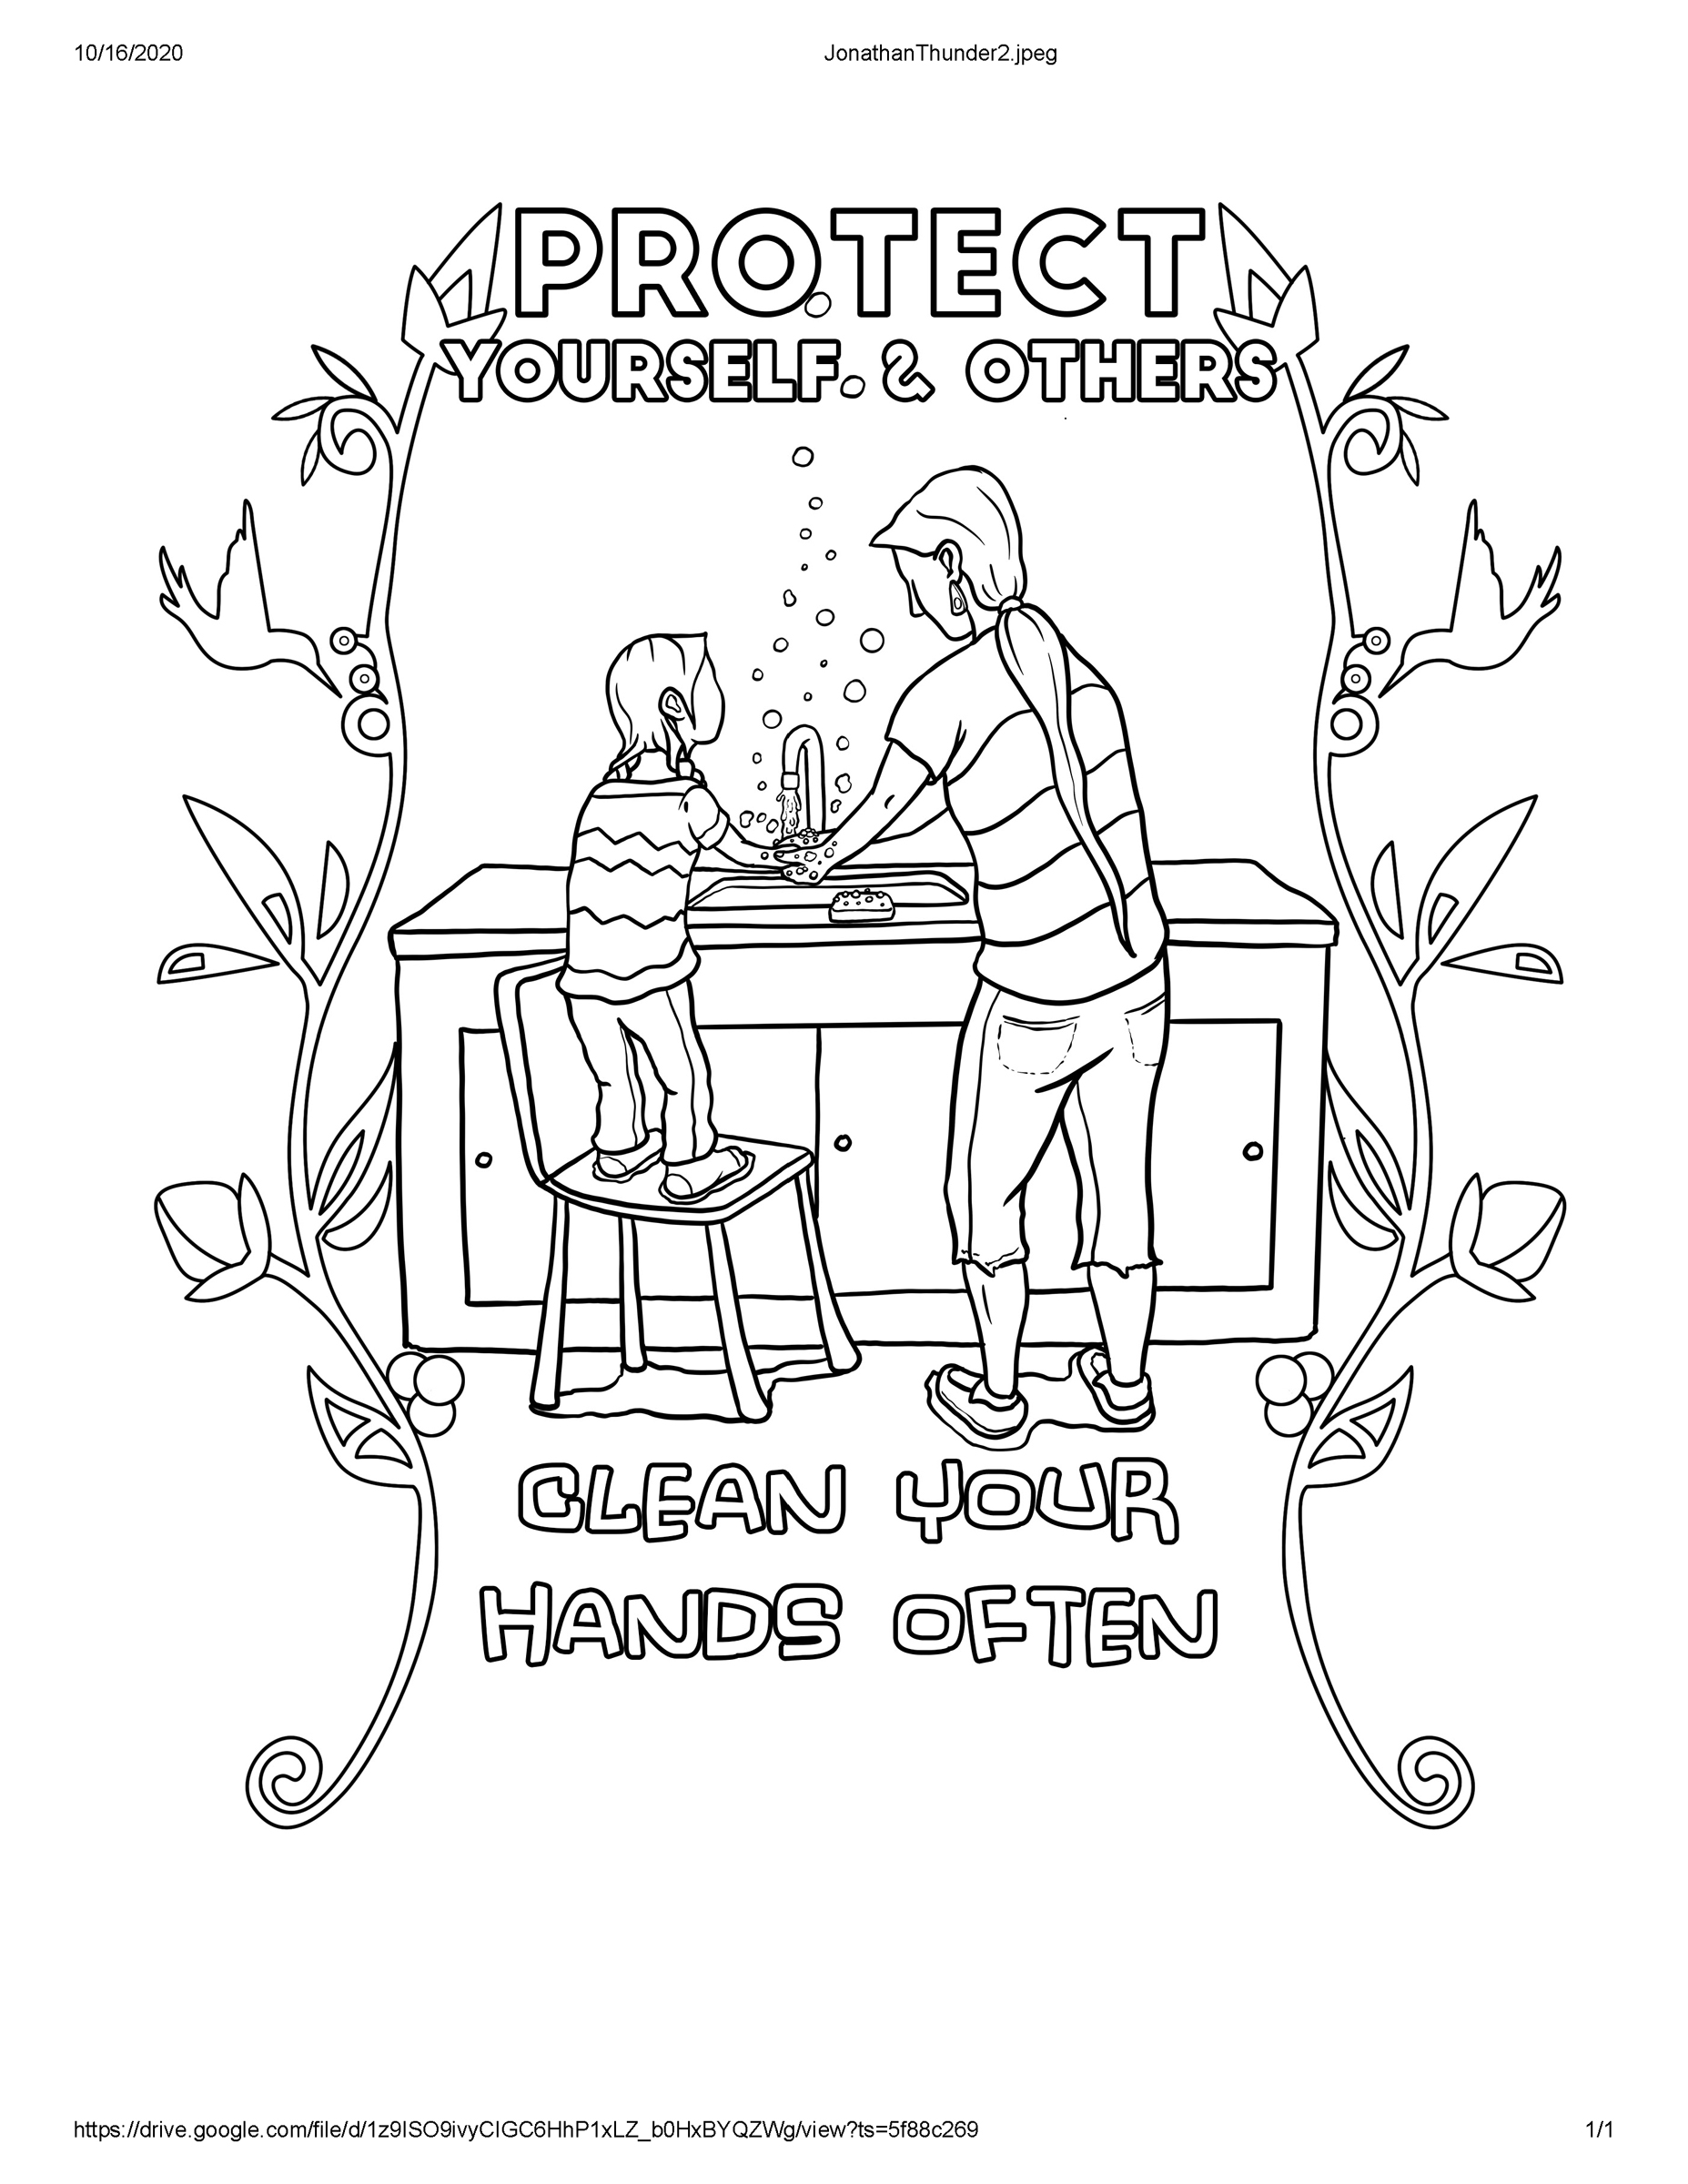 coloring sheet of vines and characters washing hands that says protect yourself and others